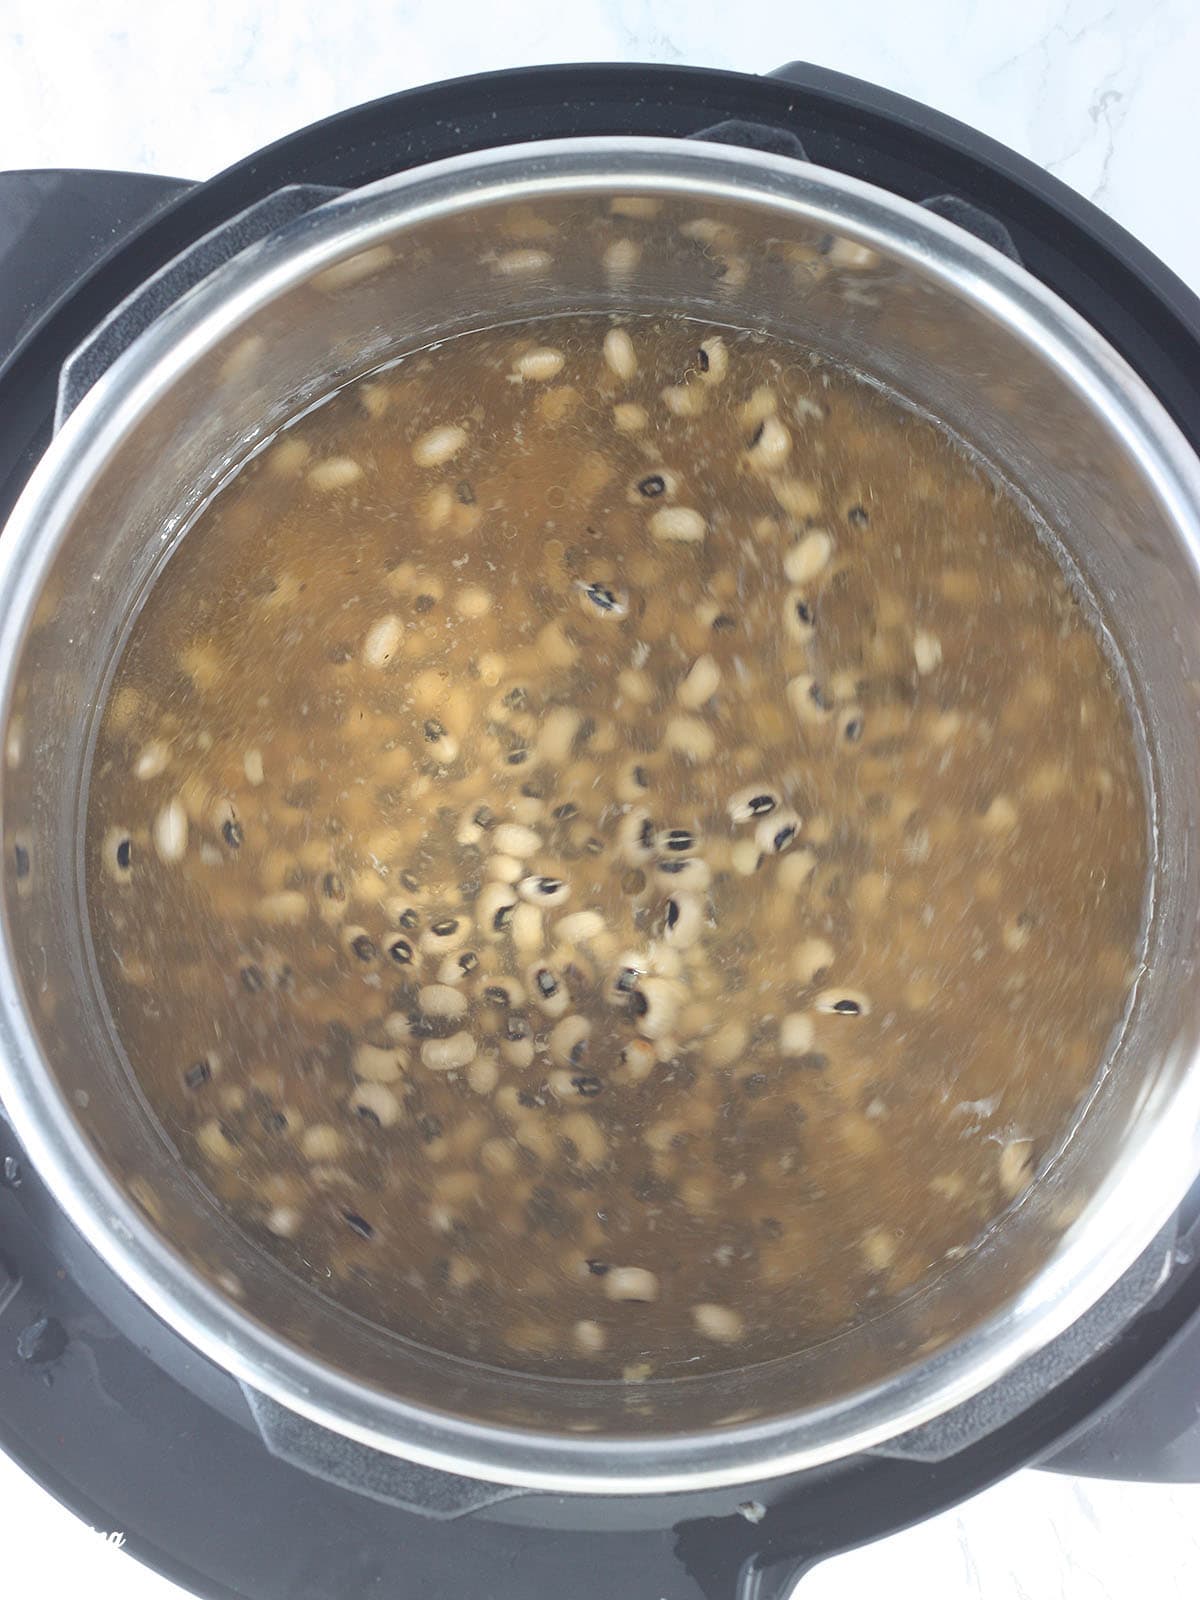 Black-eyed peas and broth after presoaking in an Instant Pot